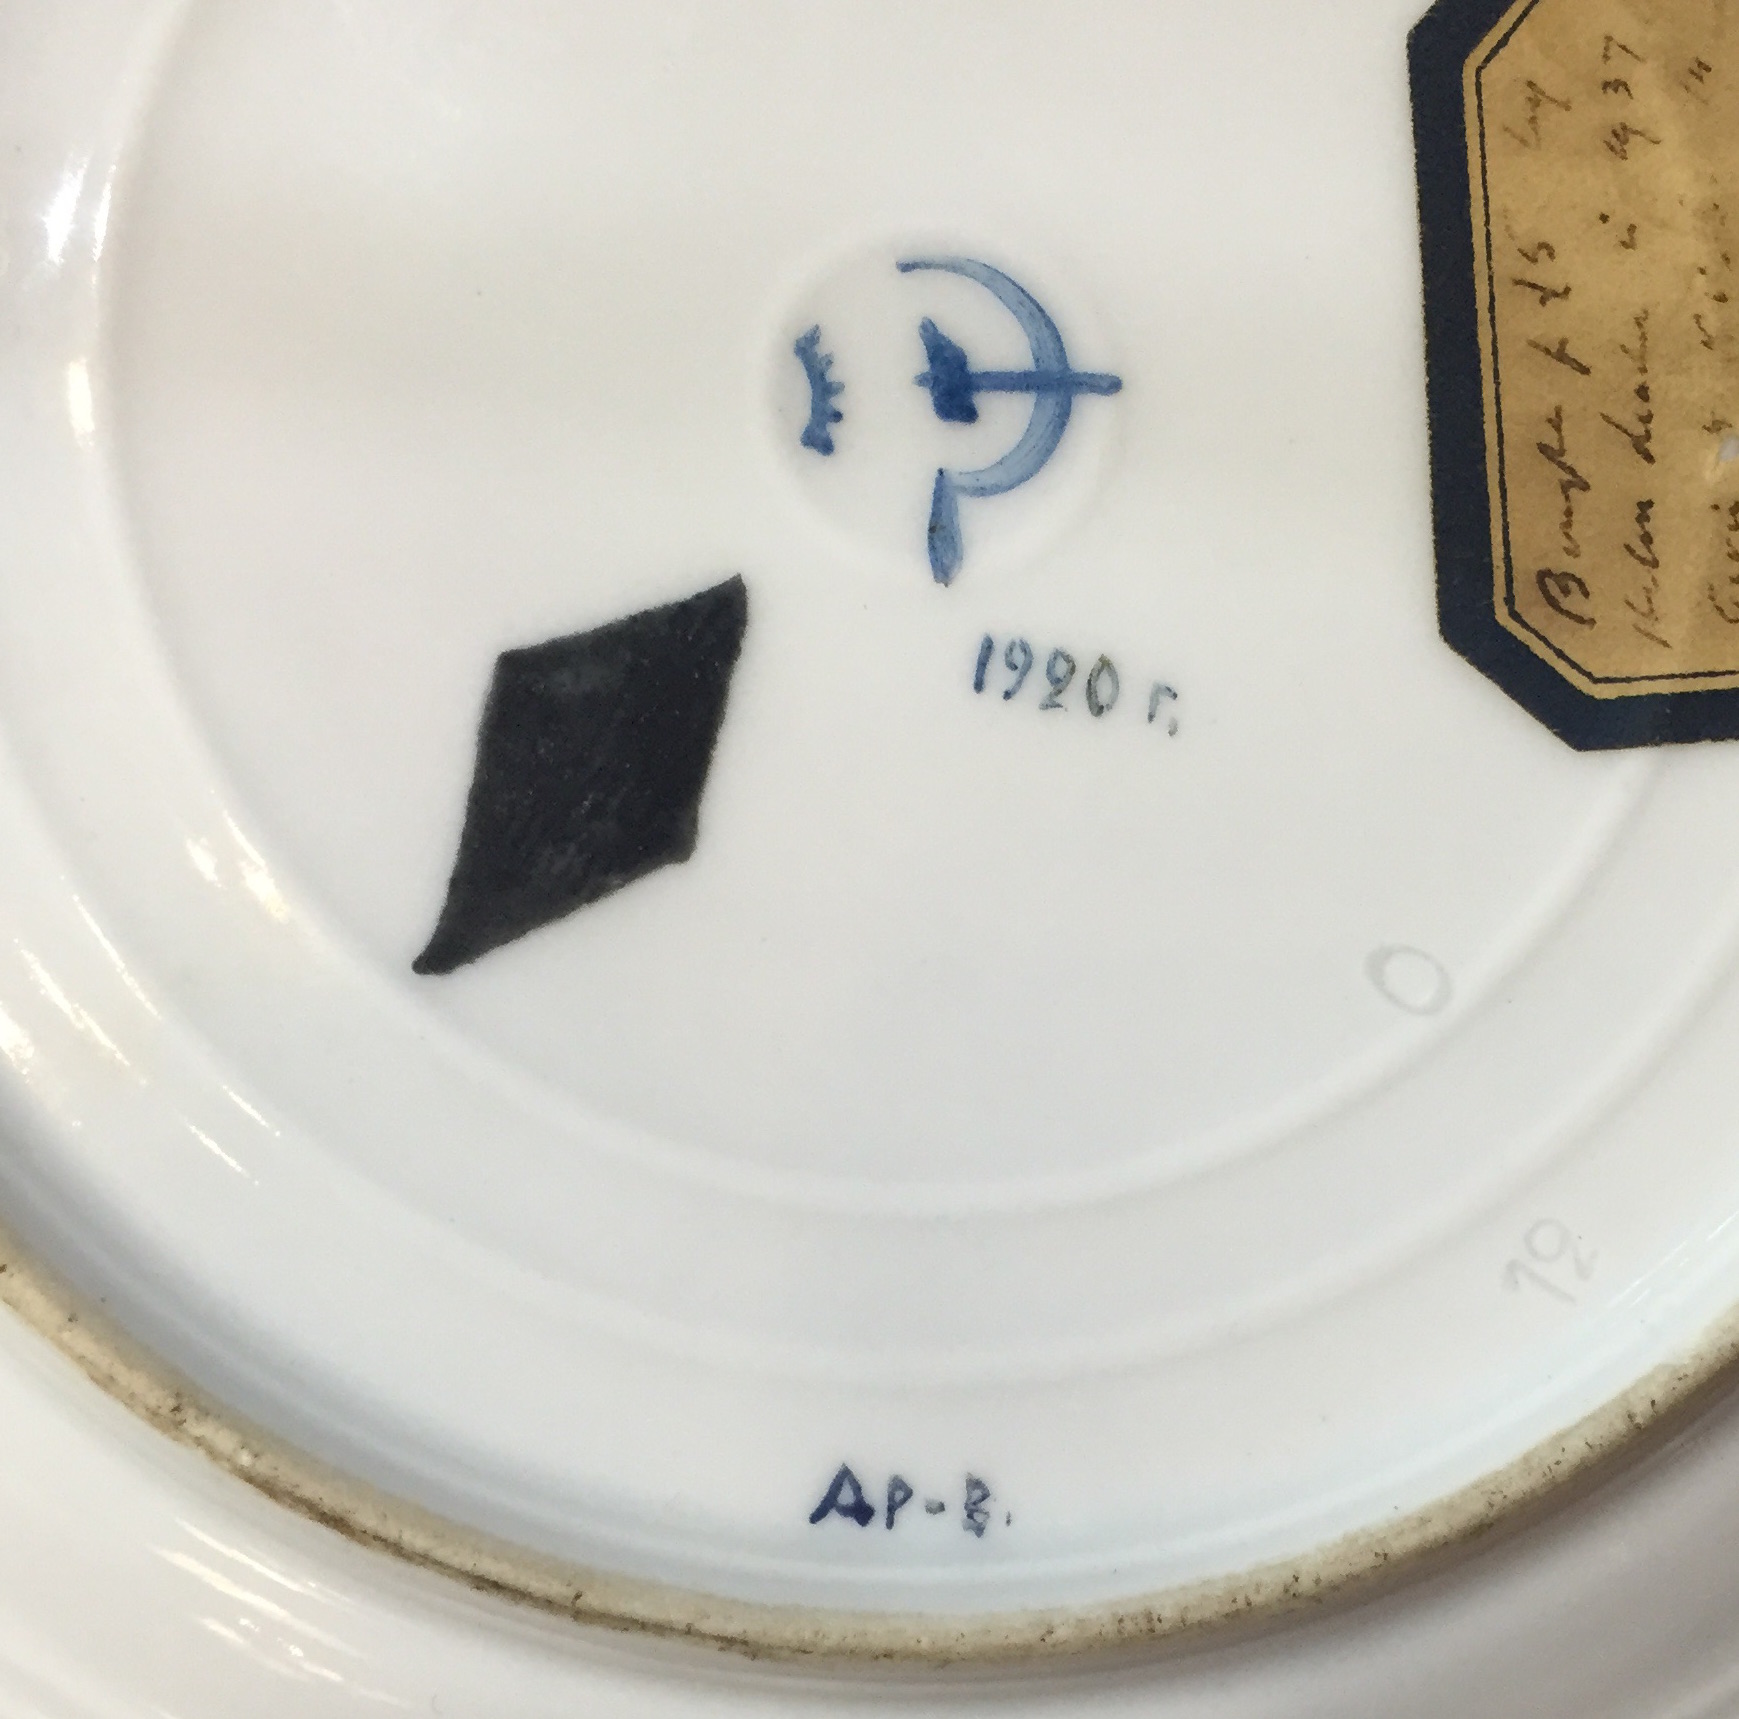 <br/>STATE PORCELAIN MANUFACTORY, DATED 1920 WITH BLUE
OVERGLAZE MANUFACTORY MARKS, SIGNED "DR-V" IN CYRILLIC,
WITH OBLITERATED NICHOLAS II MARK DATED 1909